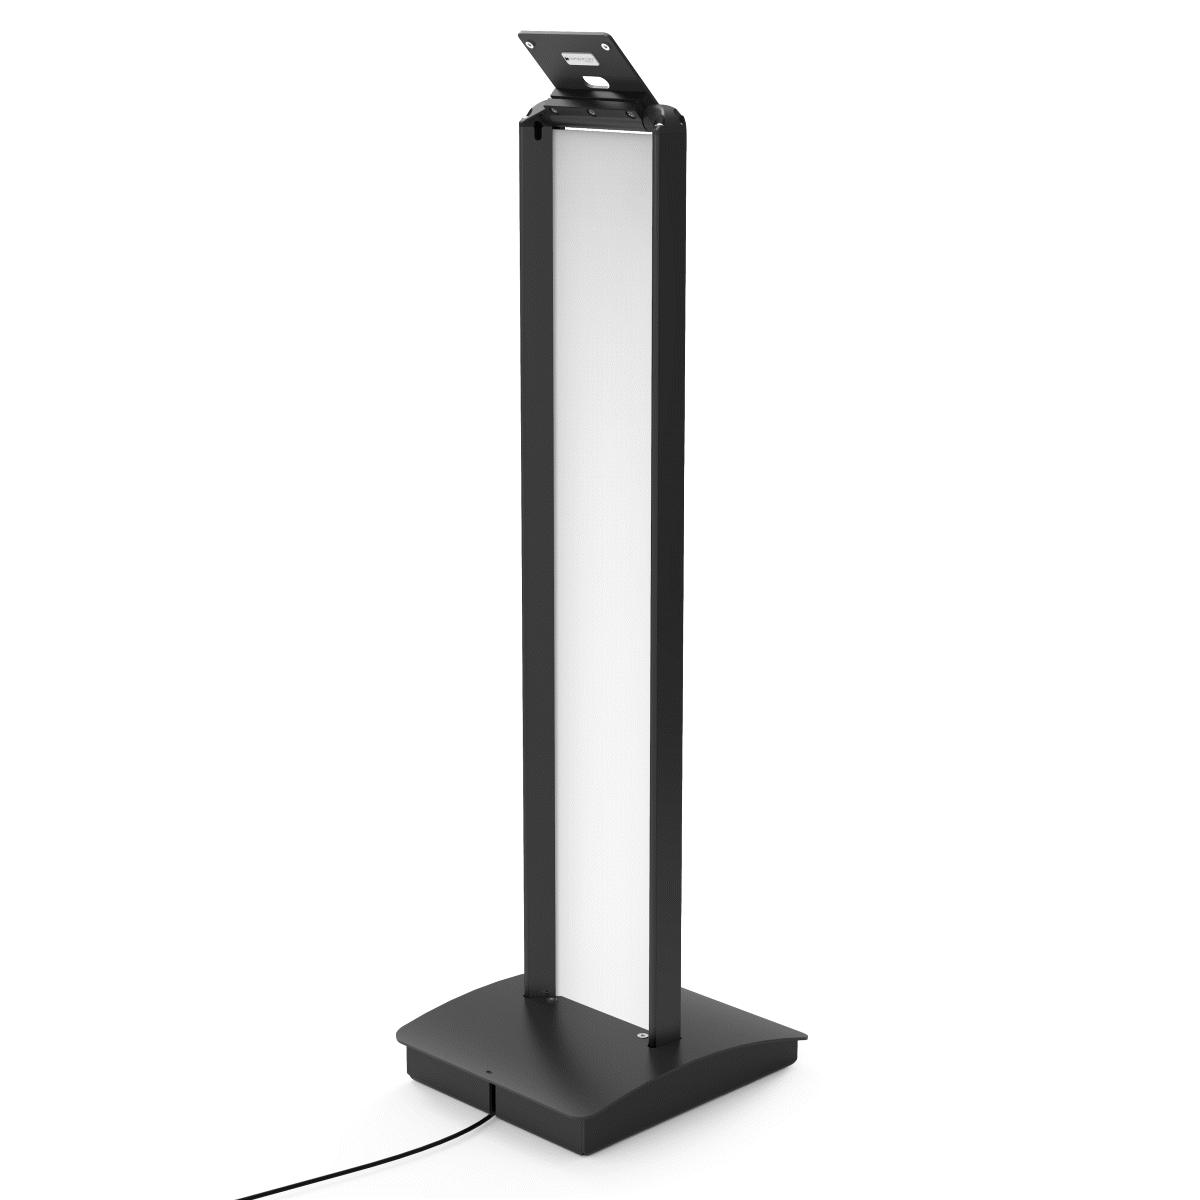 High-grade aluminum stand with cable management